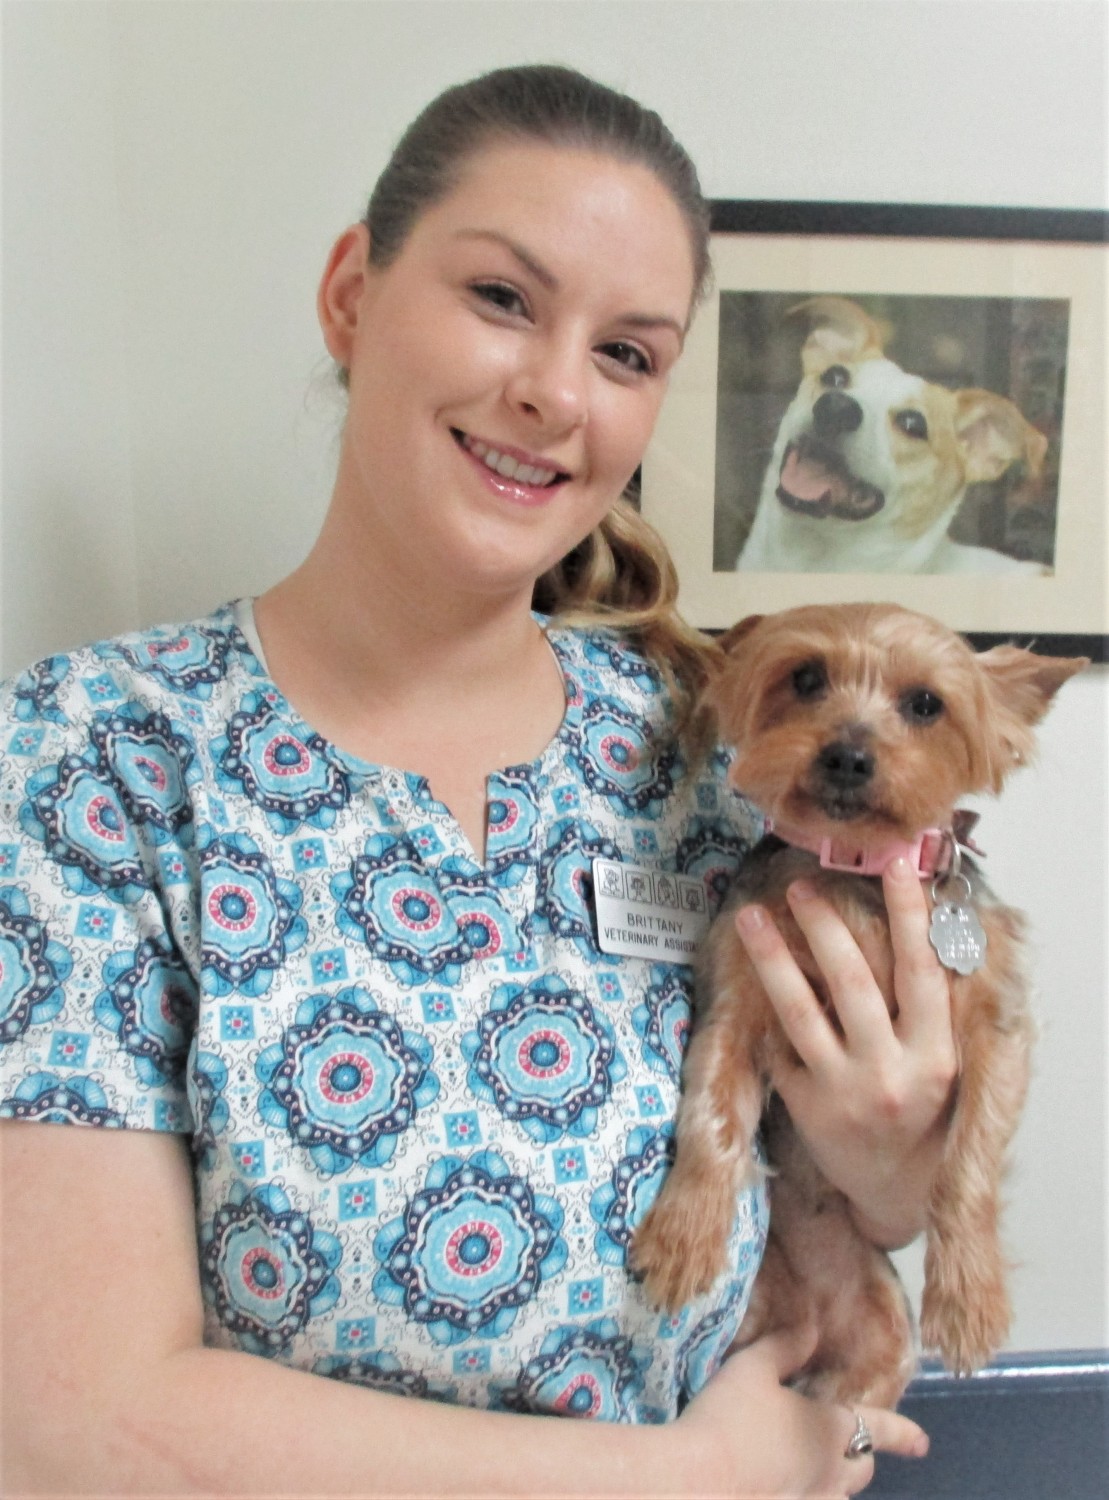 Meet Brittany - Veterinary Assistant